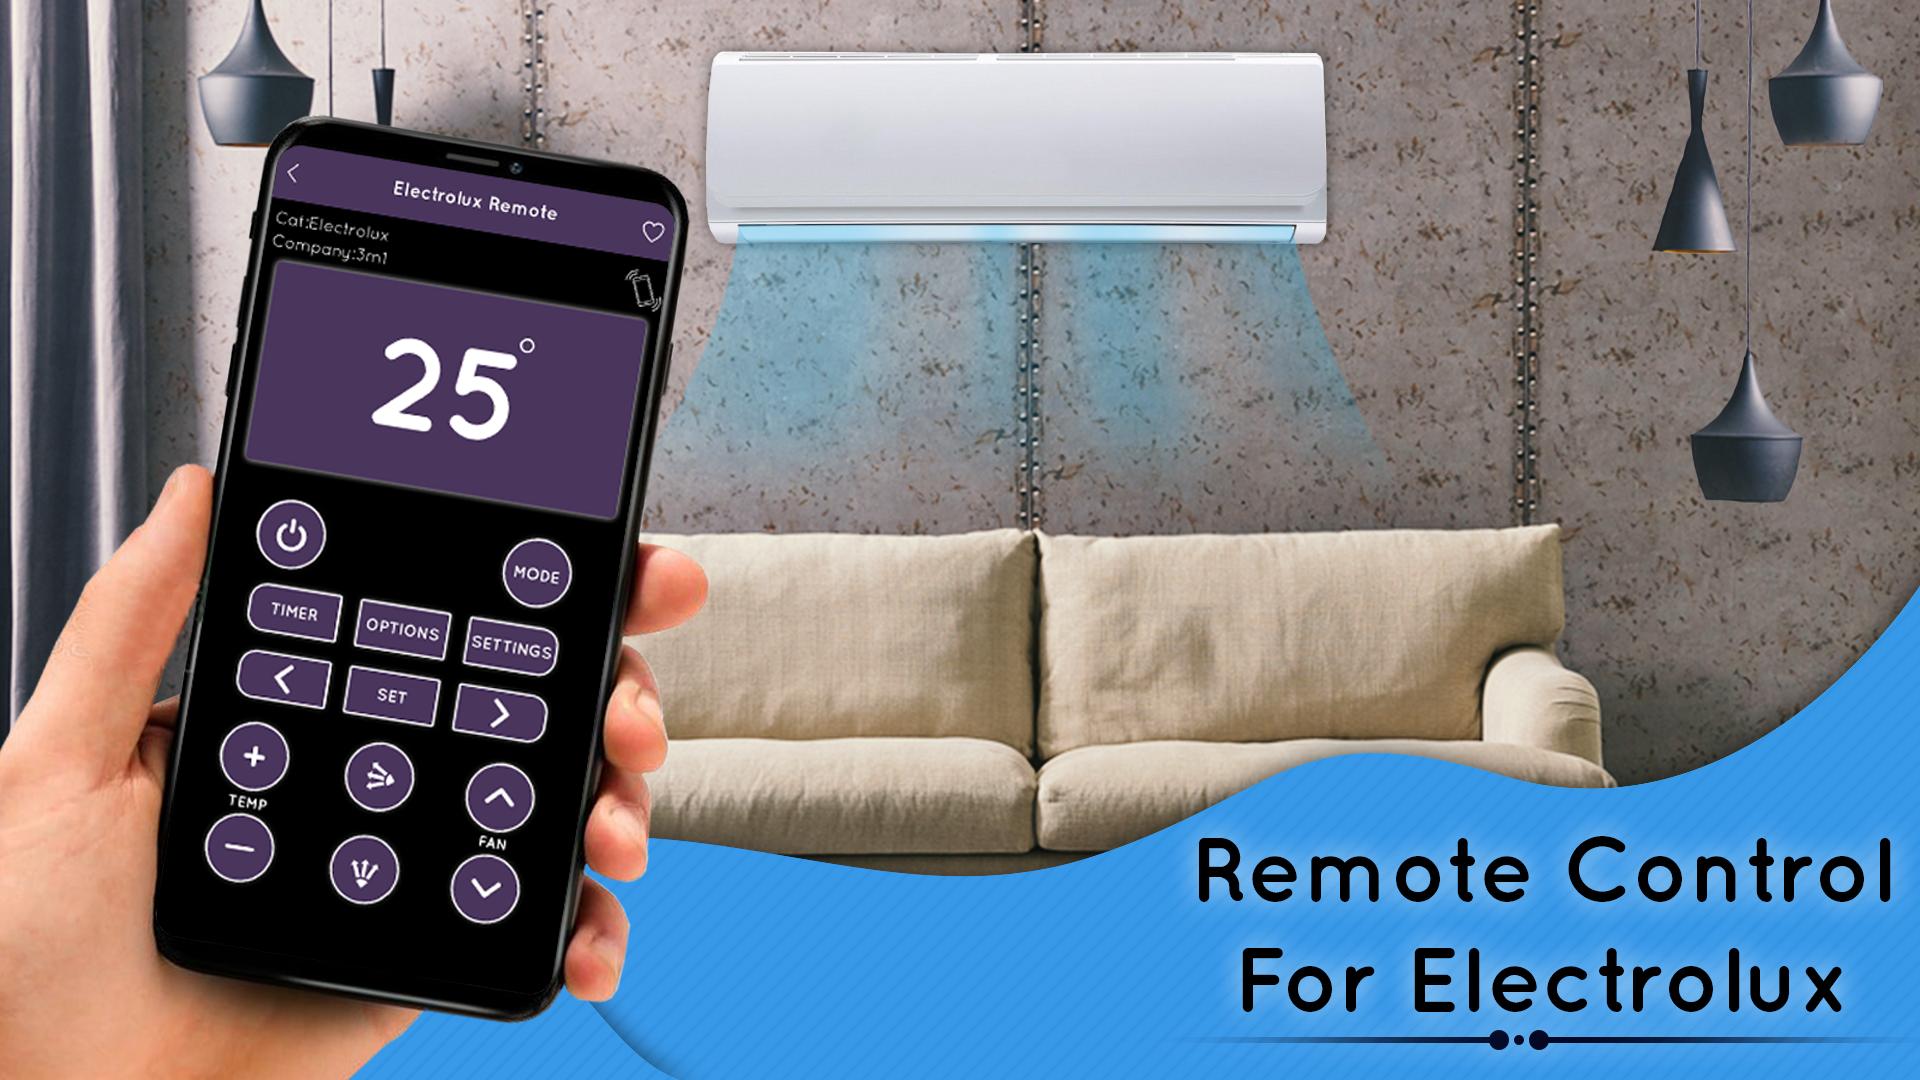 Universal Remote Control For Electrolux AC for Android - APK Download